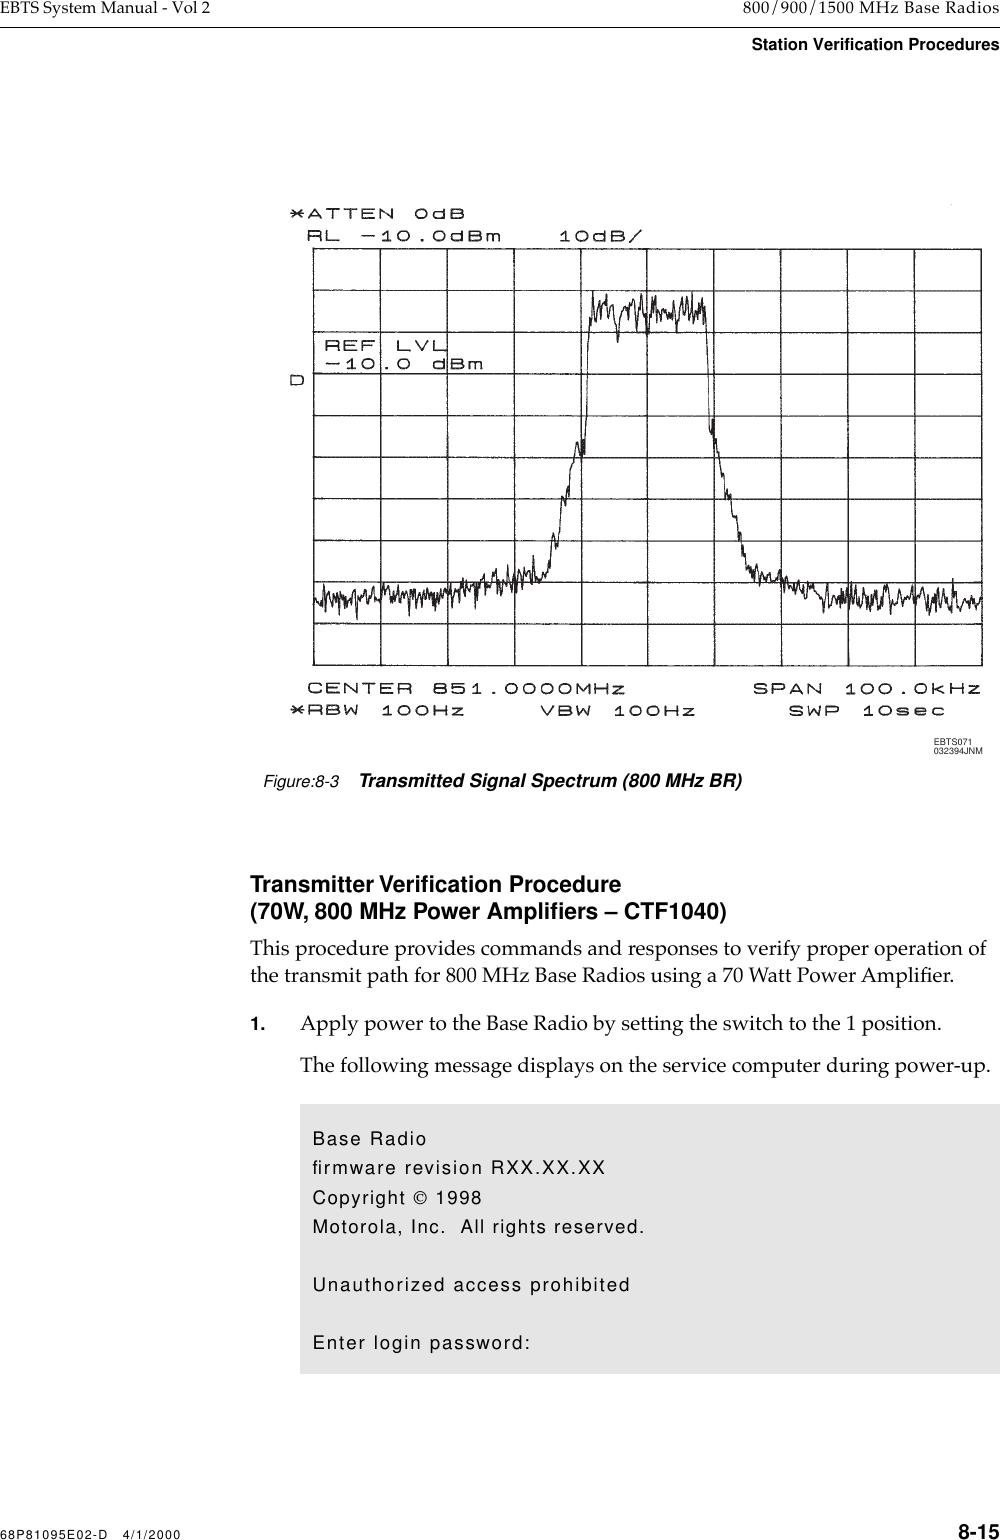 68P81095E02-D   4/1/2000 8-15EBTS System Manual - Vol 2 800/900/1500 MHz Base RadiosStation Verification ProceduresTransmitter Veriﬁcation Procedure(70W, 800 MHz Power Ampliﬁers – CTF1040) This procedure provides commands and responses to verify proper operation of the transmit path for 800 MHz Base Radios using a 70 Watt Power AmpliÞer. 1. Apply power to the Base Radio by setting the switch to the 1 position. The following message displays on the service computer during power-up.Figure:8-3Transmitted Signal Spectrum (800 MHz BR)EBTS071032394JNMBase Radioﬁrmware revision RXX.XX.XXCopyright  1998Motorola, Inc.  All rights reserved.Unauthorized access prohibitedEnter login password: